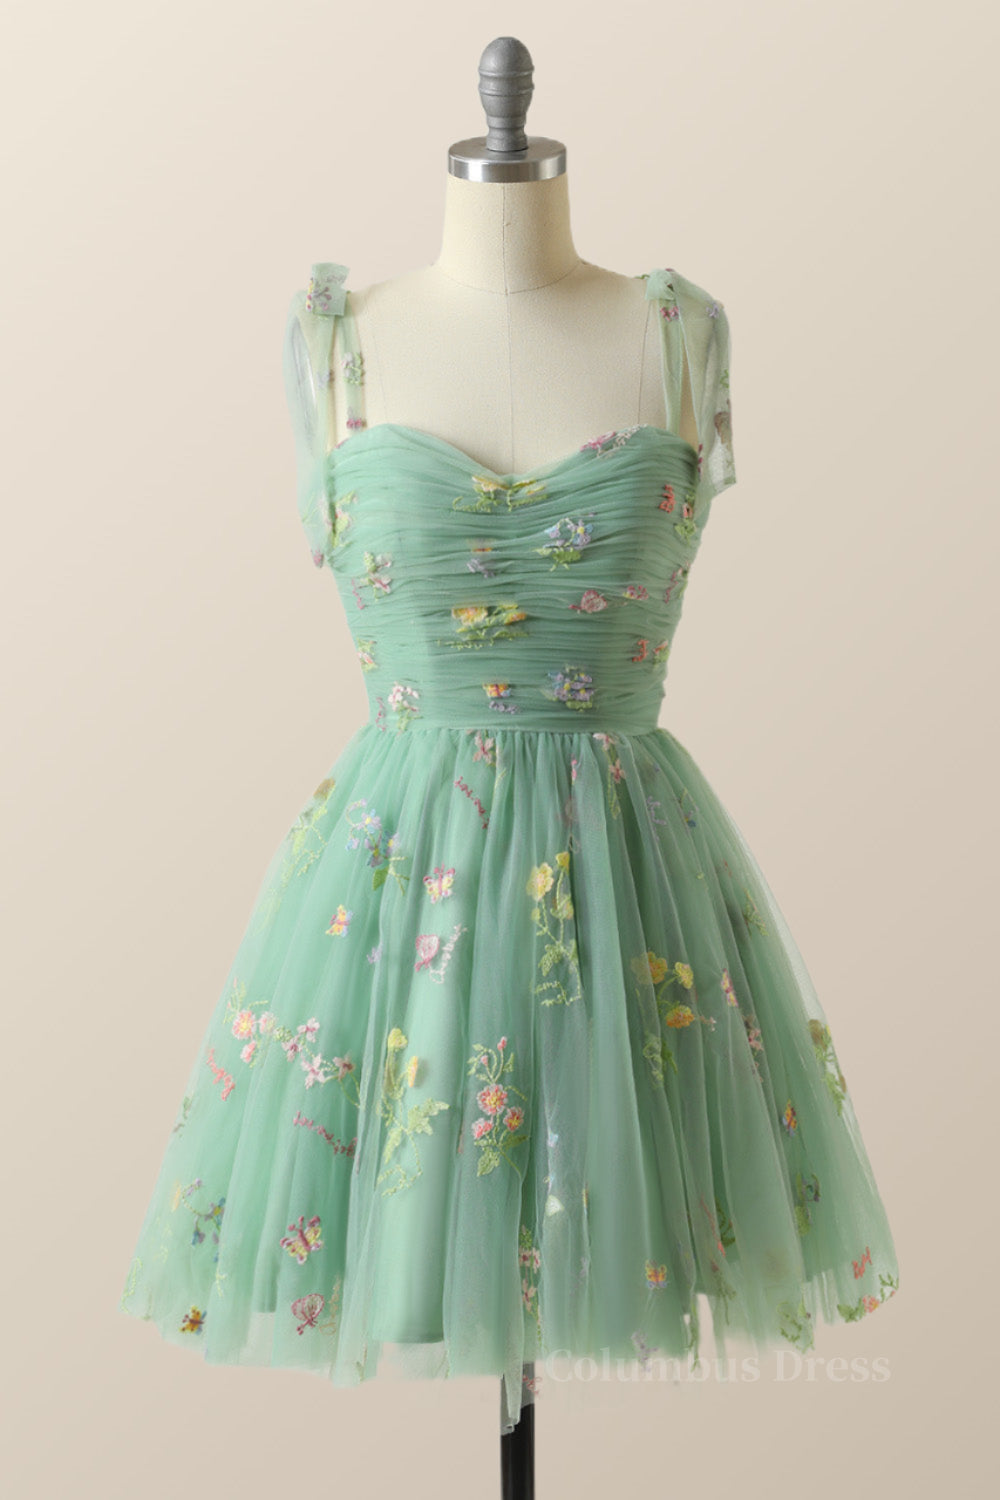 Dress Design, Green A-line Floral Embroidered Short Party Dress